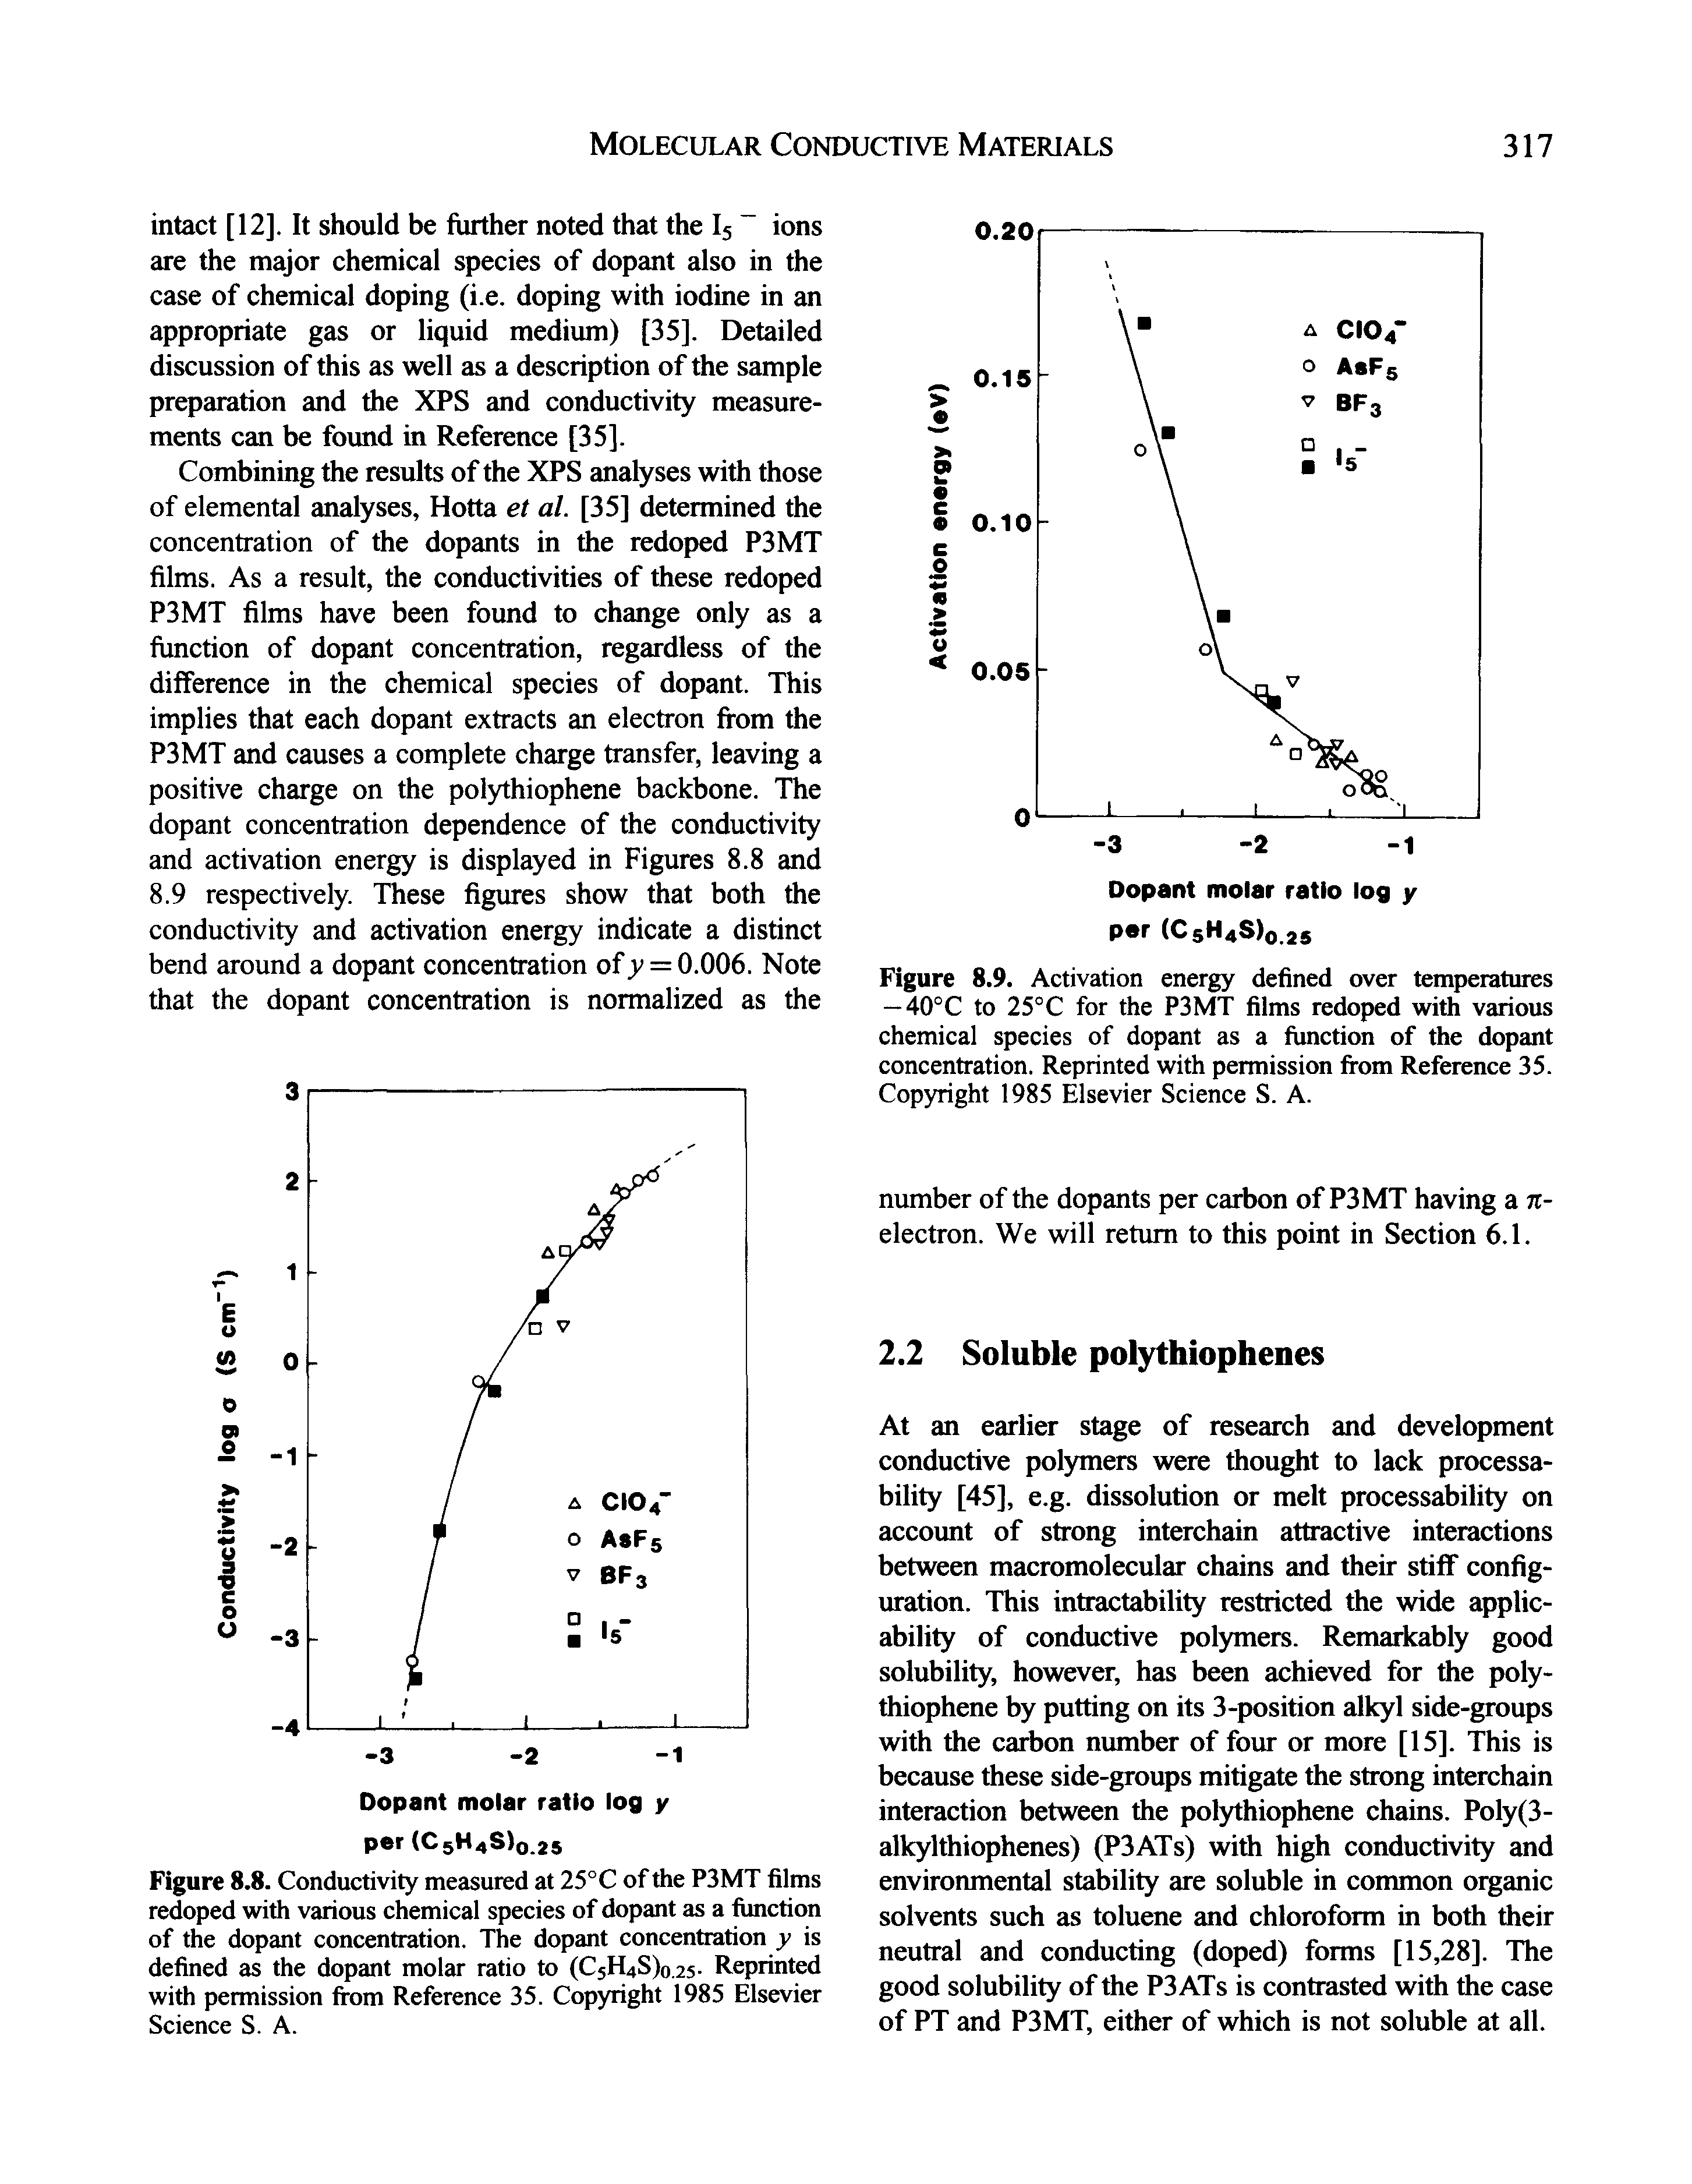 Figure 8.9. Activation energy defined over temperatures — 40°C to 25°C for the P3MT films redoped with various chemical species of dopant as a fimction of the dopant concentration. Reprinted with permission from Reference 35. Copyright 1985 Elsevier Science S. A.